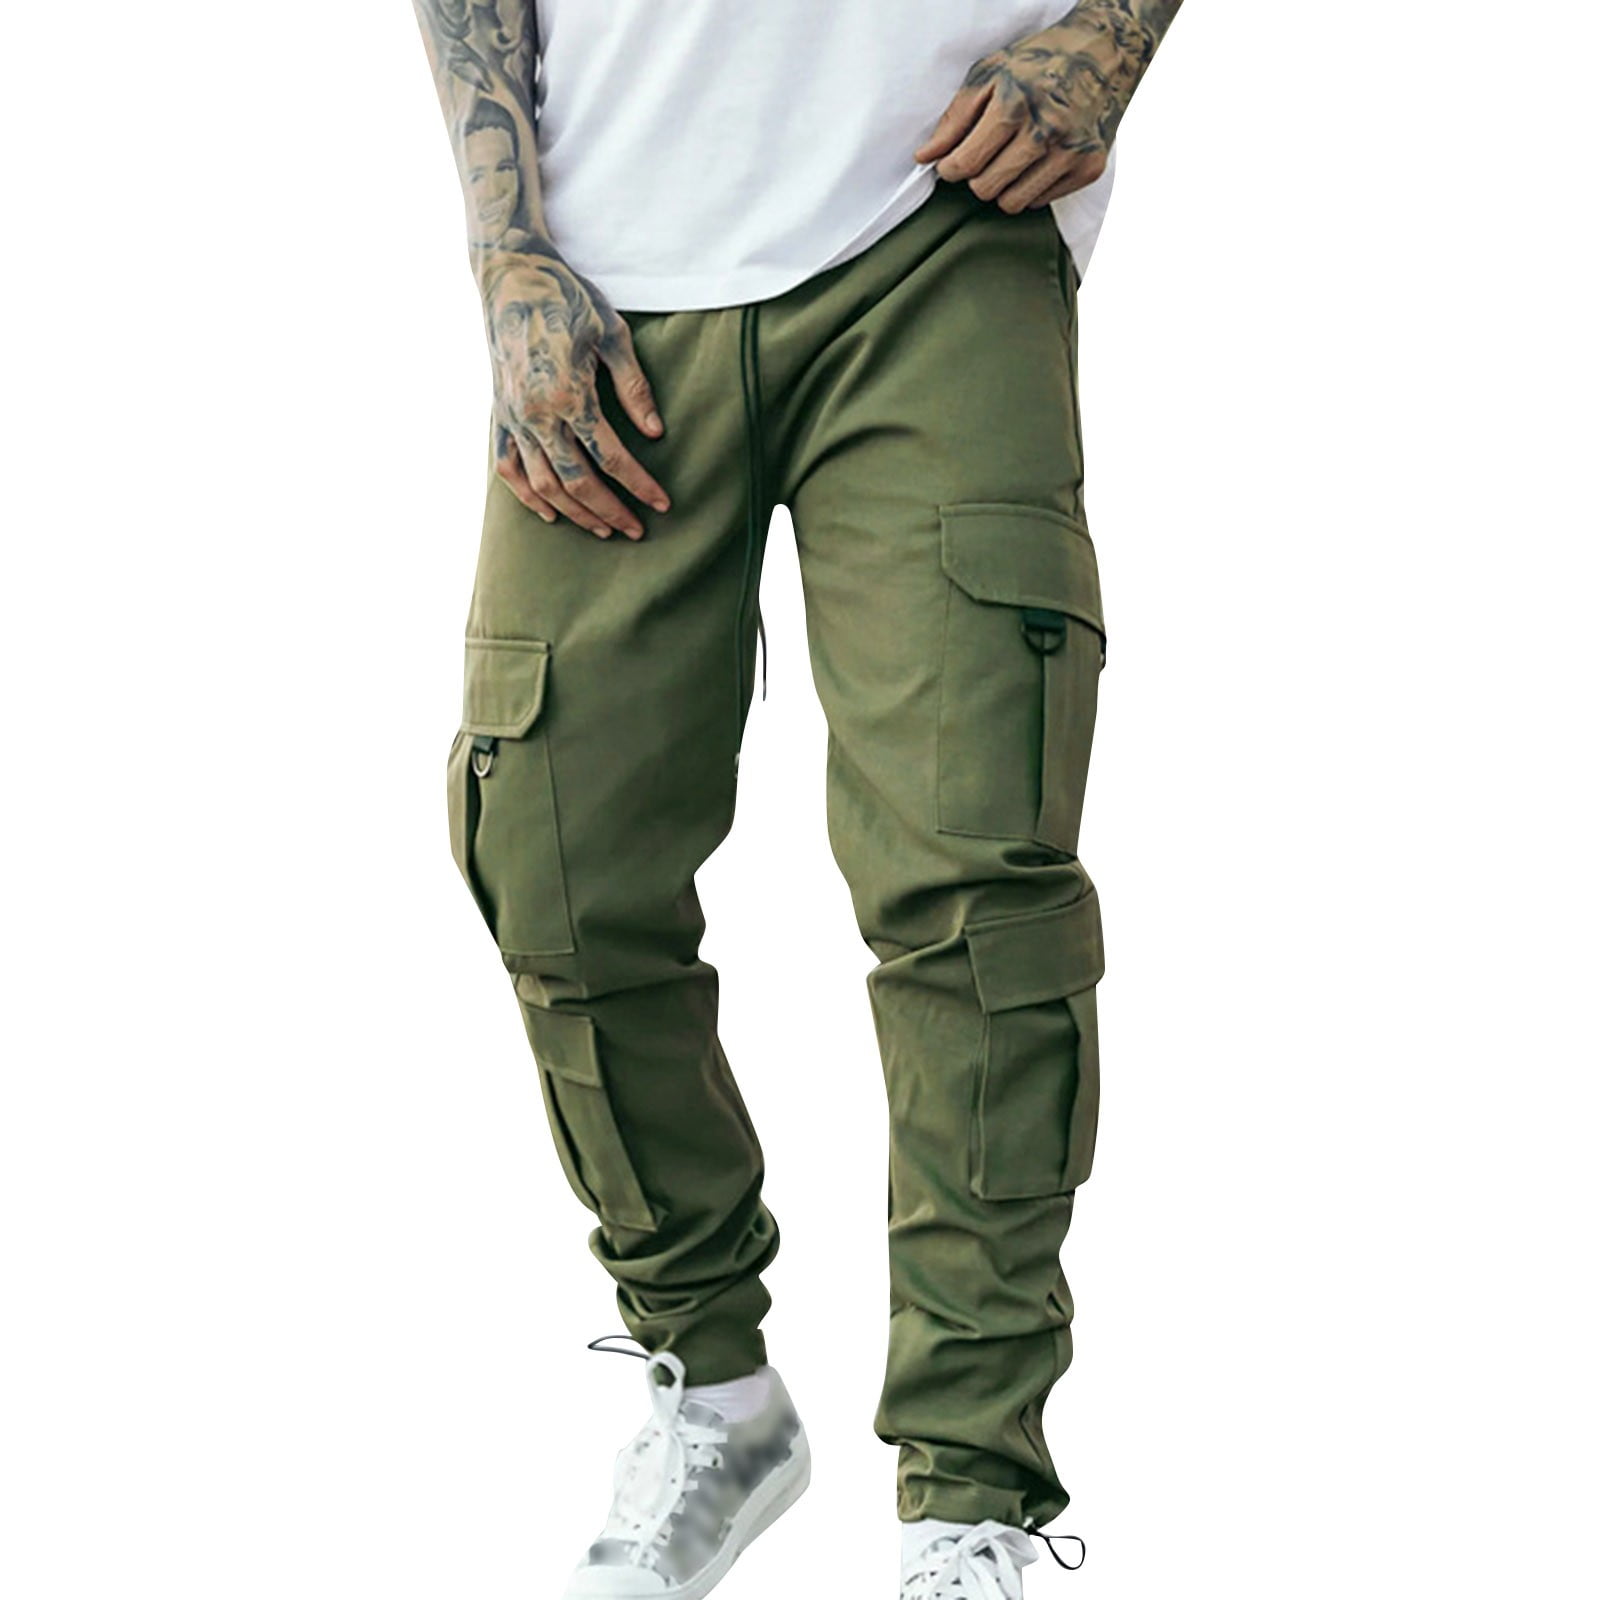 Pants For Men Fashion Baggy Spring And Summer Pant All Solid Color Painting  Cotton Linen Loose Plus Size Trouser Beach Pockets Pant Trousers -  Walmart.com